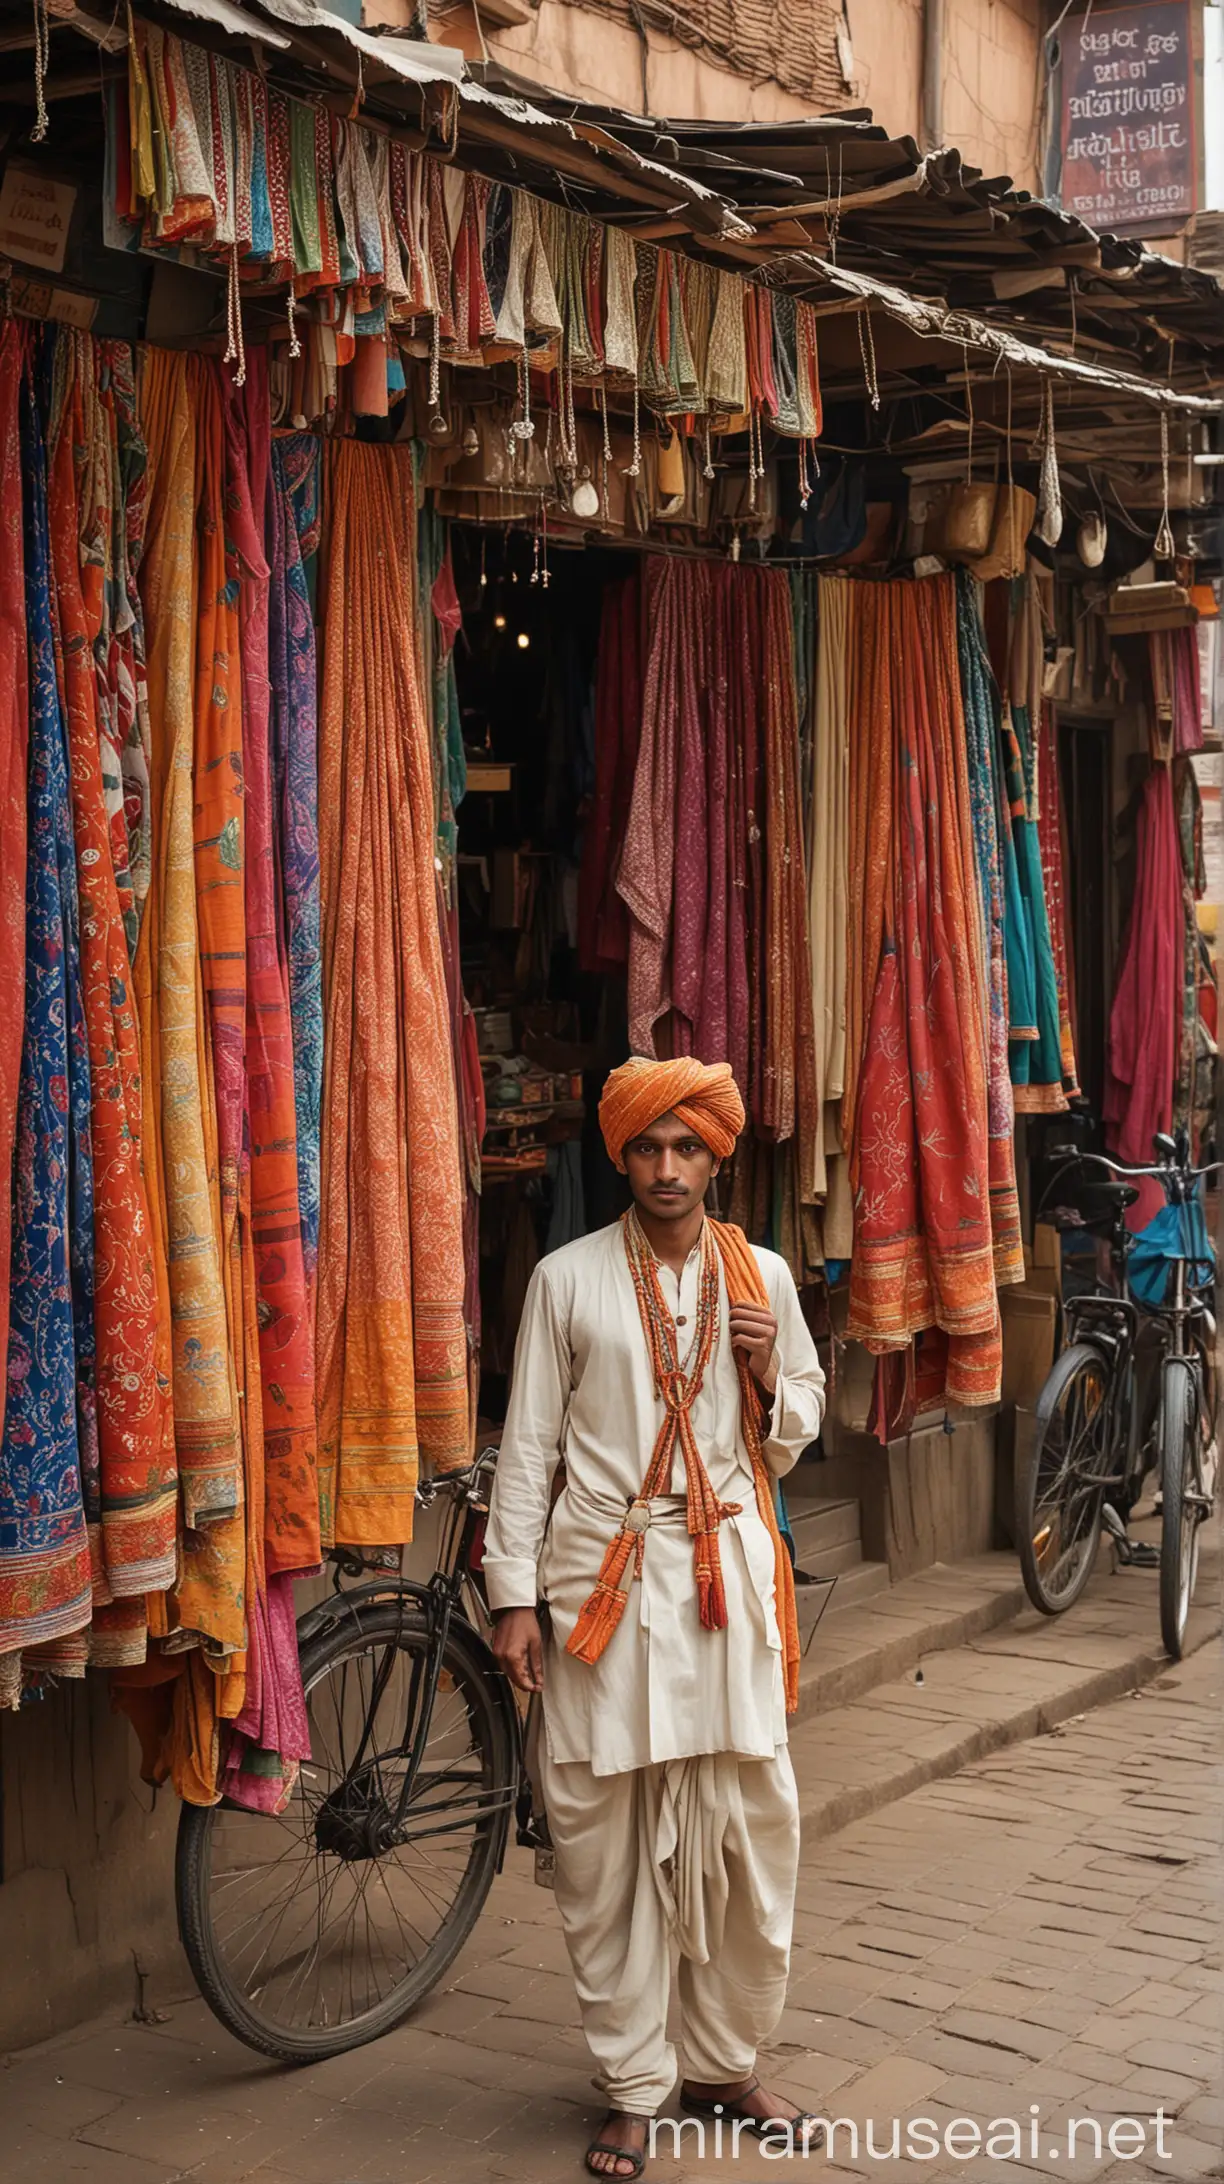 The image features a 20-year-old confident Rajasthani clothing seller standing proudly outside his small saree shop, situated in the bustling main marketplace of a 1970s Indian town. The shop is a quaint, modest structure with a simple wooden facade and a tin roof, blending seamlessly with the vibrant market surroundings.

Outside the shop, a stunning array of sarees is displayed, hanging from ropes and hooks. The sarees are a kaleidoscope of colors and intricate patterns, showcasing the rich textile heritage of Rajasthan. Each saree, with its unique design, draws the attention of passersby.The young seller is dressed in traditional Rajasthani attire, wearing a crisp white kurta paired with a colorful turban. The turban is meticulously wrapped, featuring bright hues and intricate patterns that reflect his cultural roots.The marketplace around him is alive with activity. Stalls and shops line both sides of the street, offering a variety of goods from fresh produce to handmade crafts. People in traditional Indian clothing—women in sarees and men in dhotis and turbans—move about, negotiating prices and chatting animatedly. Bicycles and rickshaws weave through the crowd.In the background, other market stalls and shoppers fade slightly out of focus, ensuring the young seller remains the central figure. The ambient sounds of the marketplace—voices bargaining, the clinking of coins, the occasional ringing of a bicycle bell—seem almost audible, adding to the immersive quality of the image.This image captures a slice of life from 1970s India,